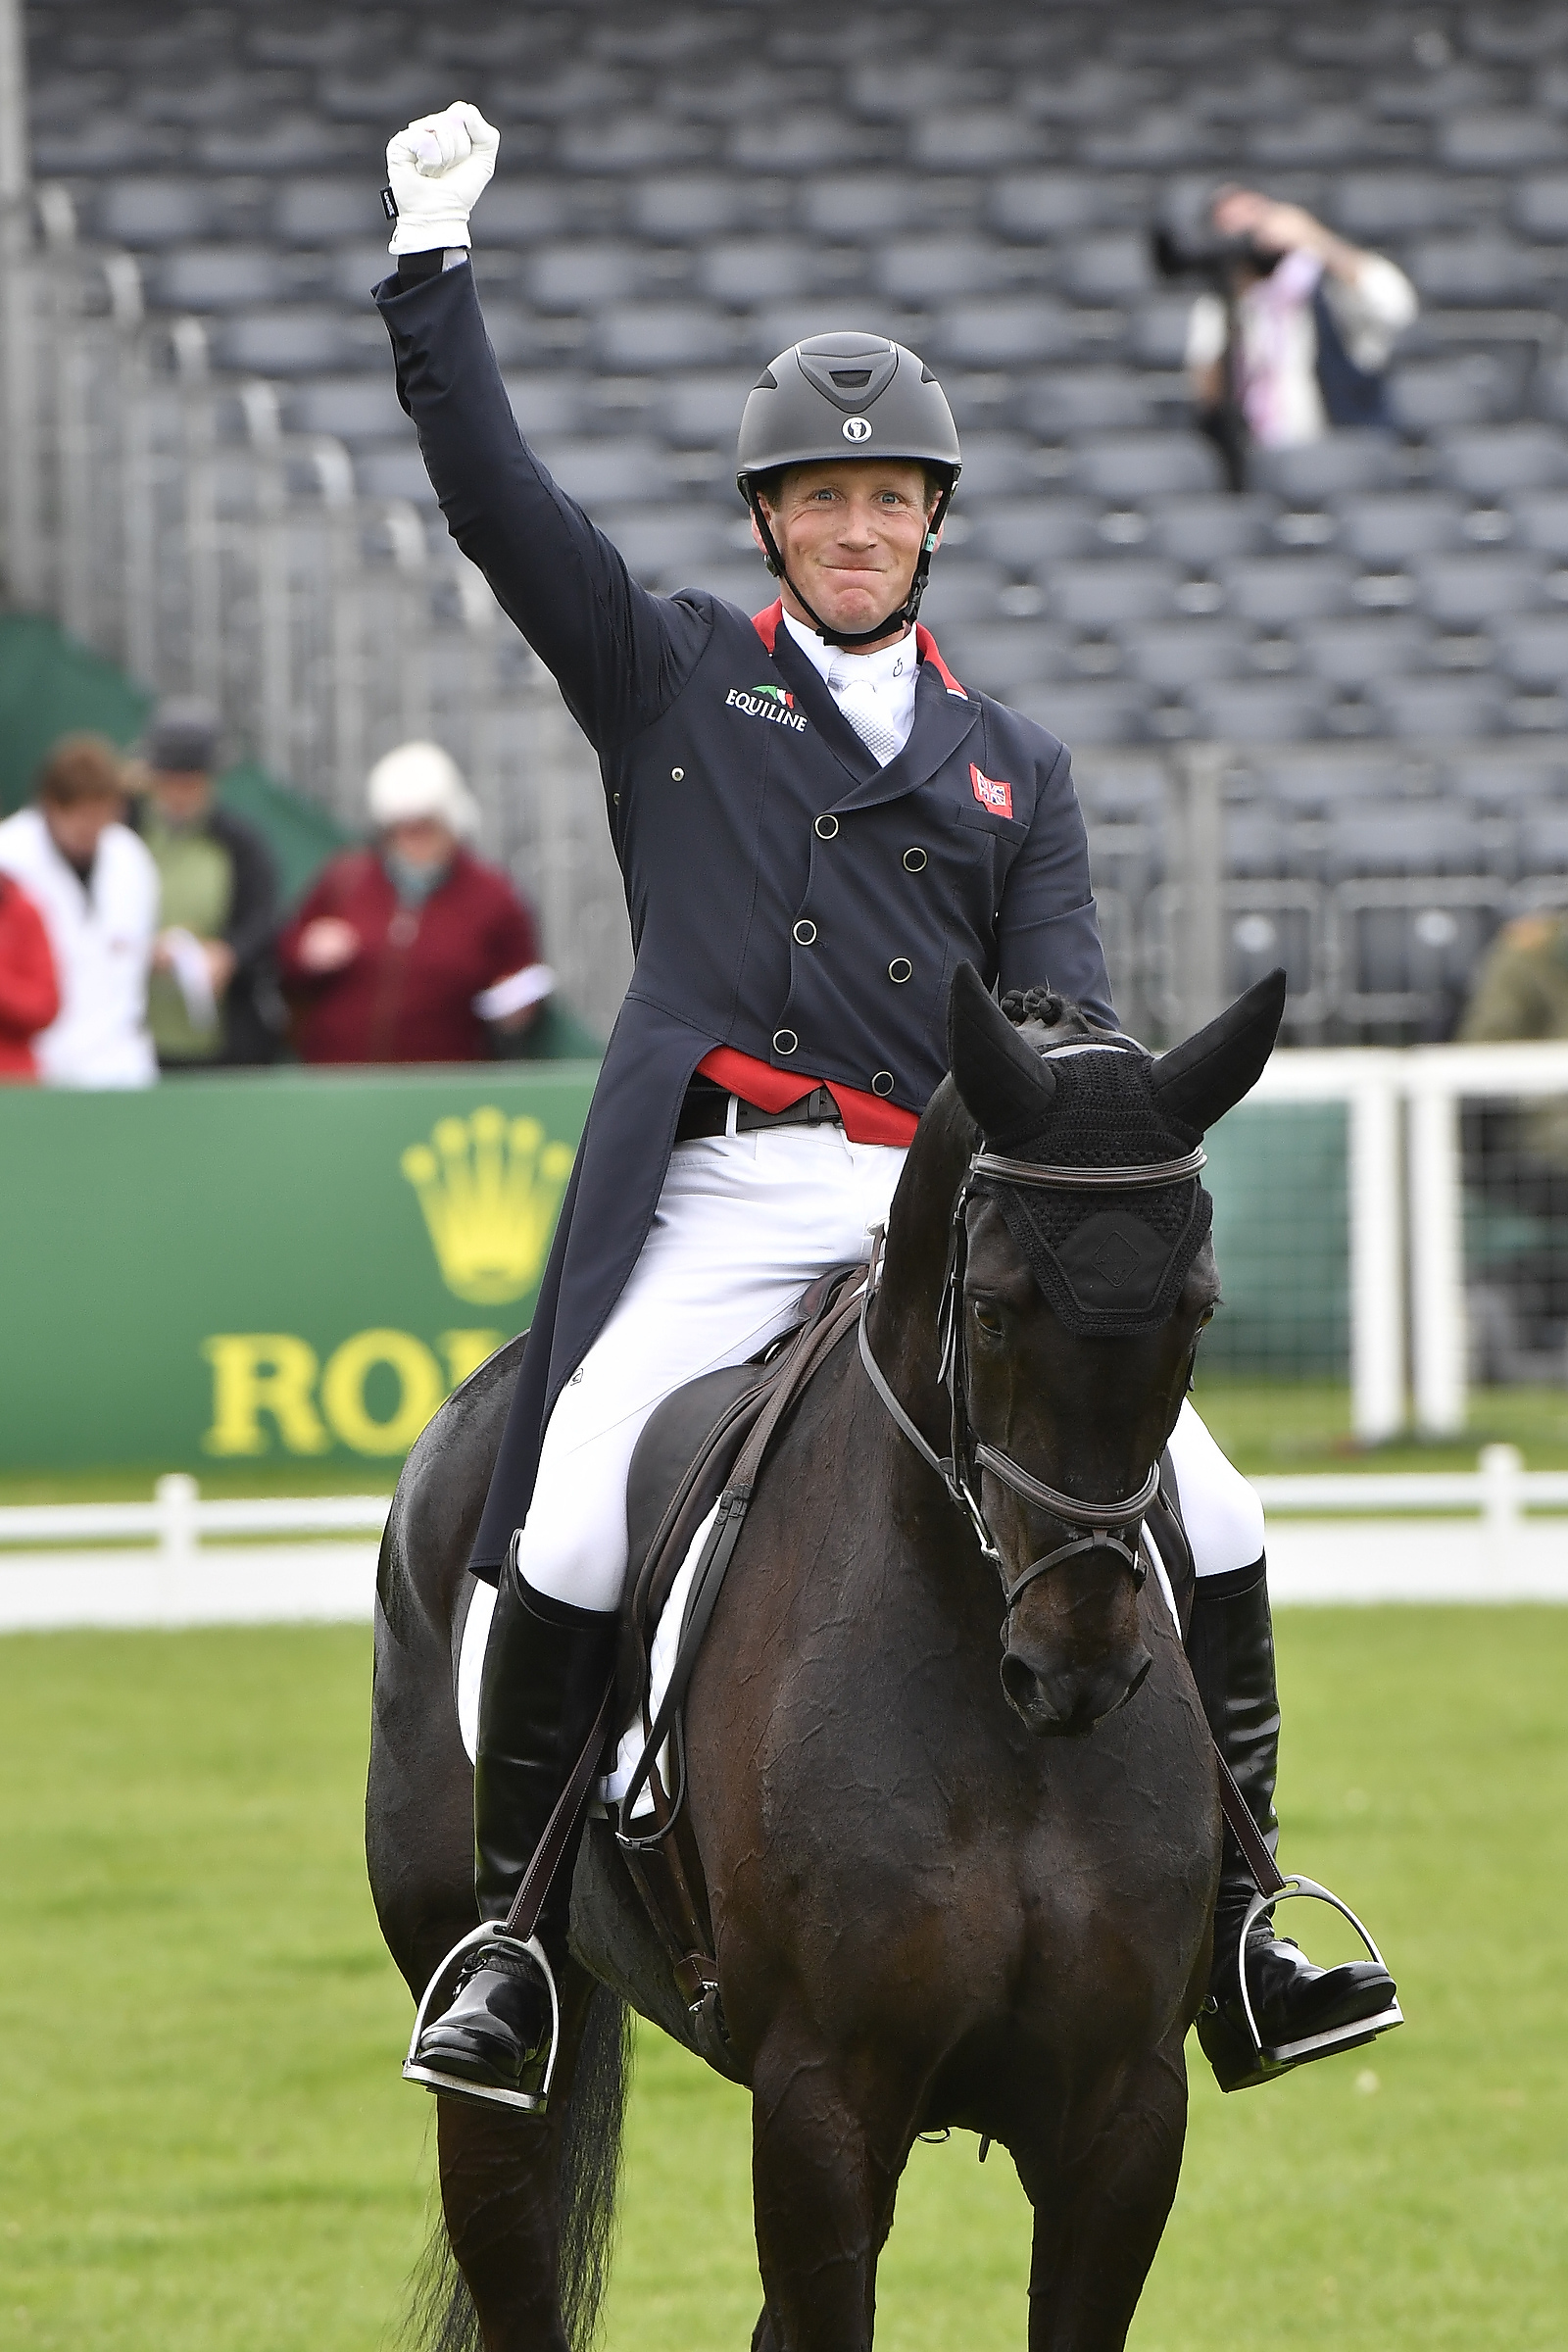 British Riders Dominate on Day One of Badminton Horse Trials Dressage